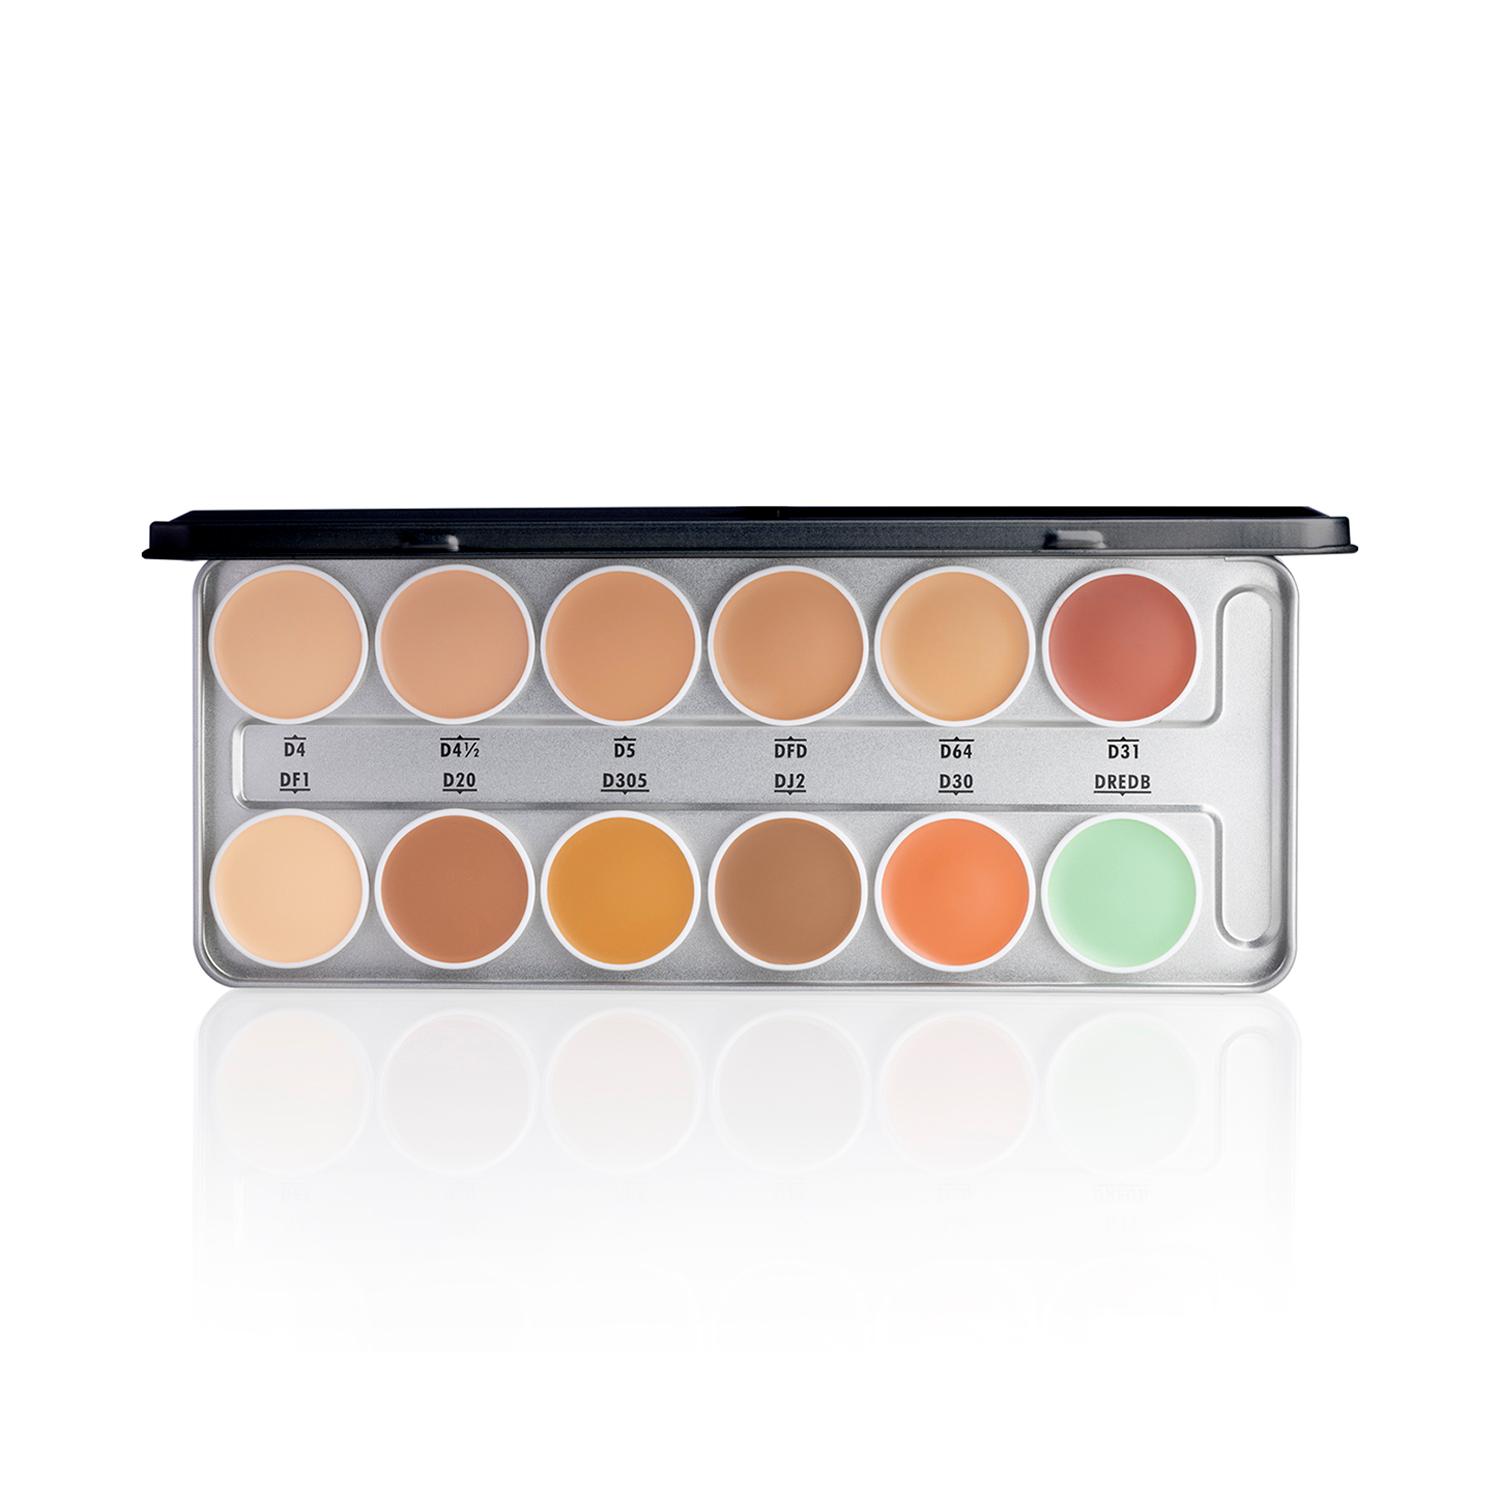 PAC | PAC Cosmic Concealer Palette - X12 Shade (3.5g)